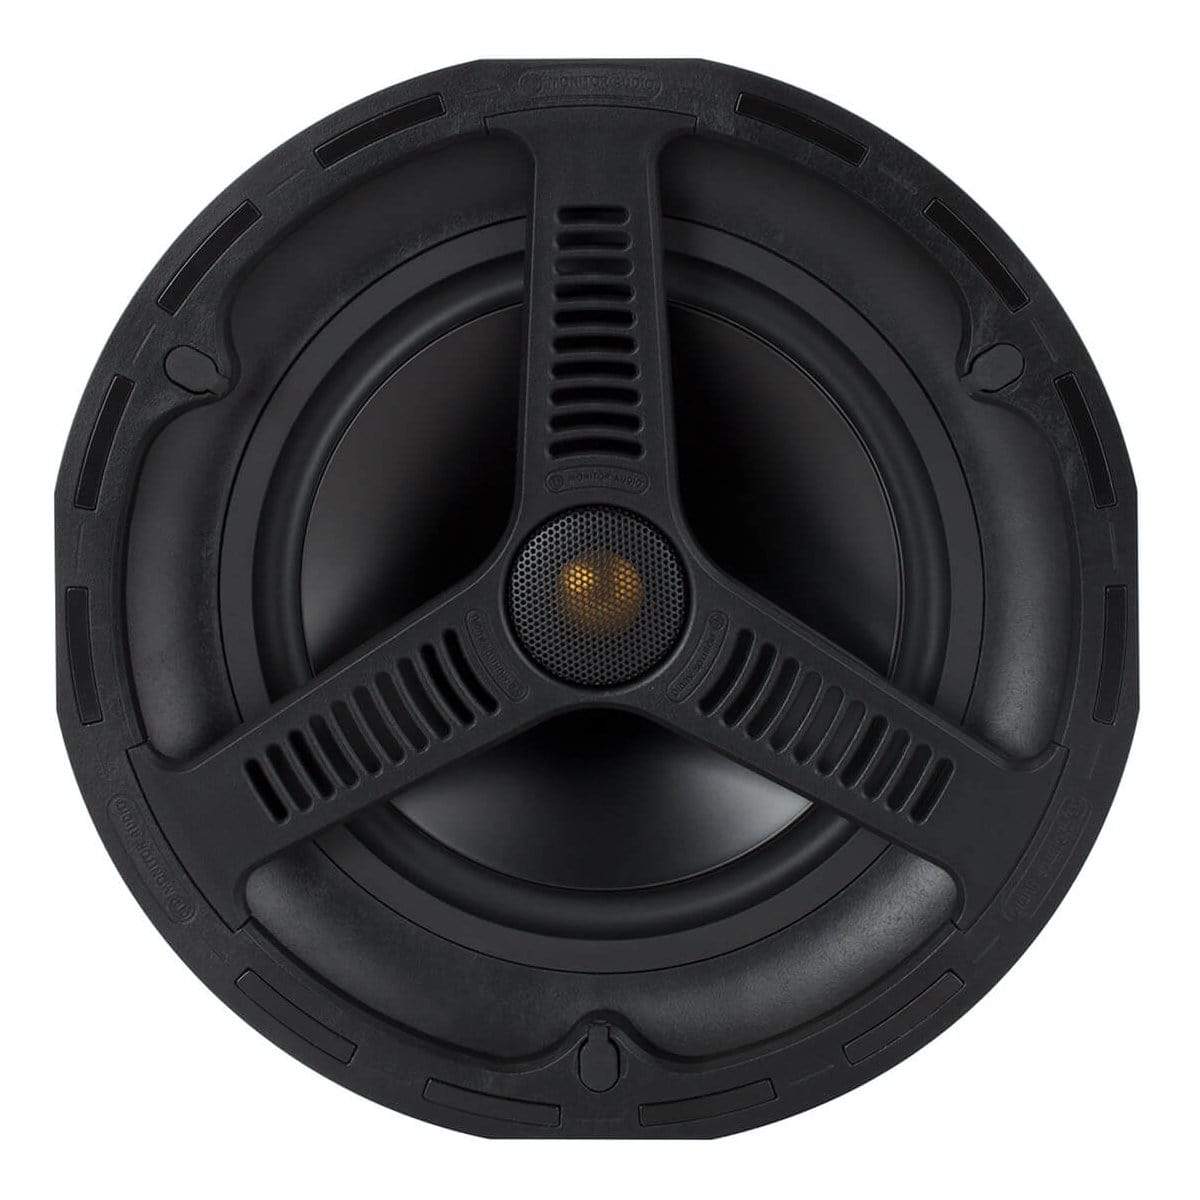 Monitor Audio AWC280 Outdoor In-Ceiling Speaker